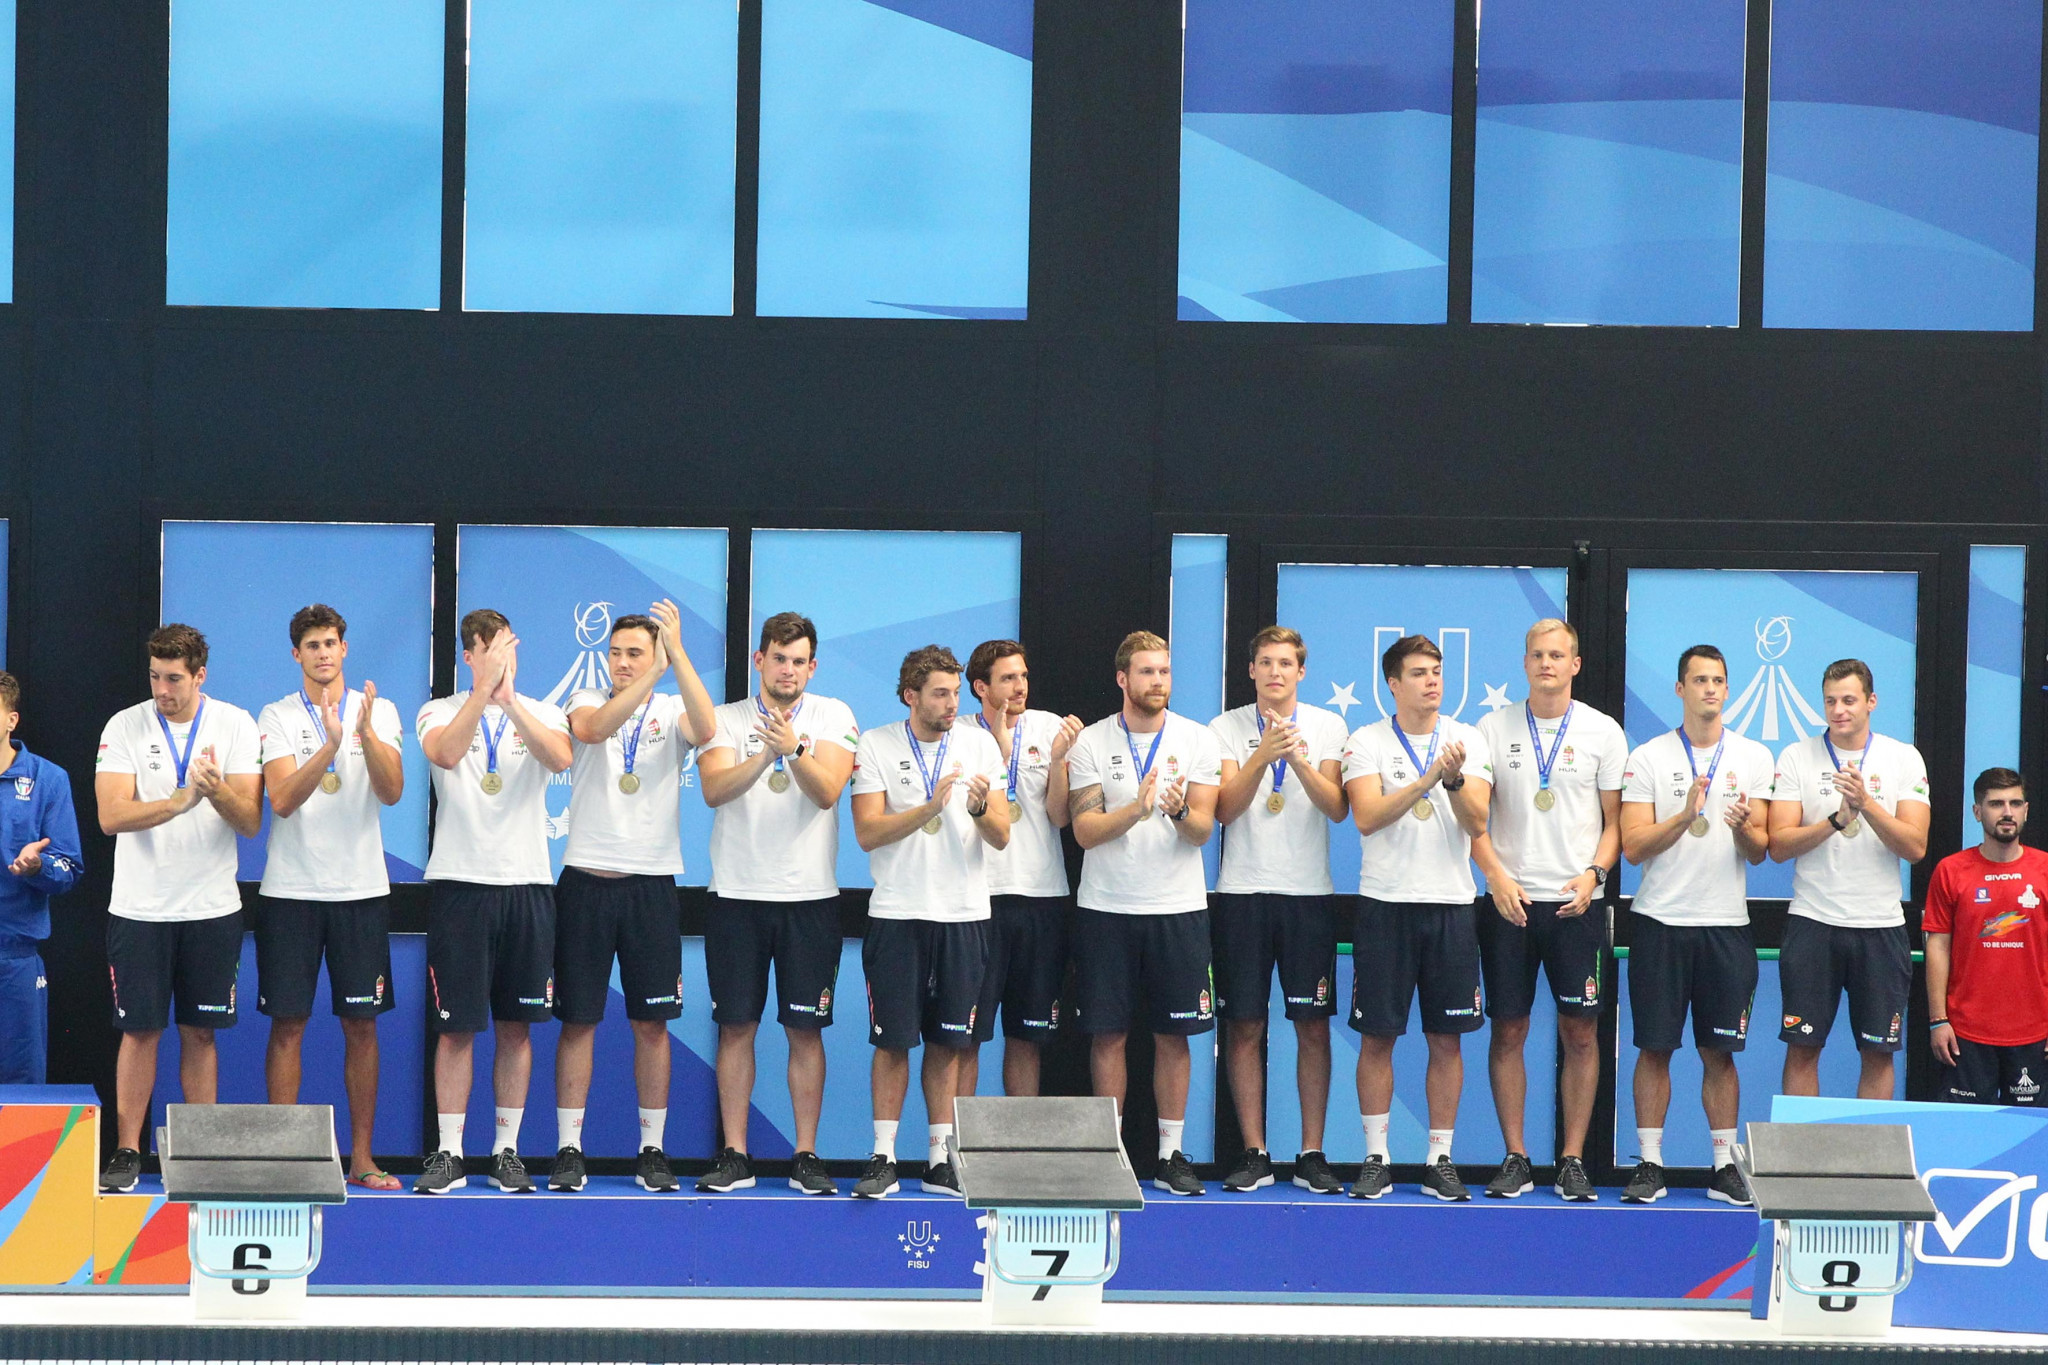 Hungary finished with bronze after a shootout victory against Russia ©Naples 2019